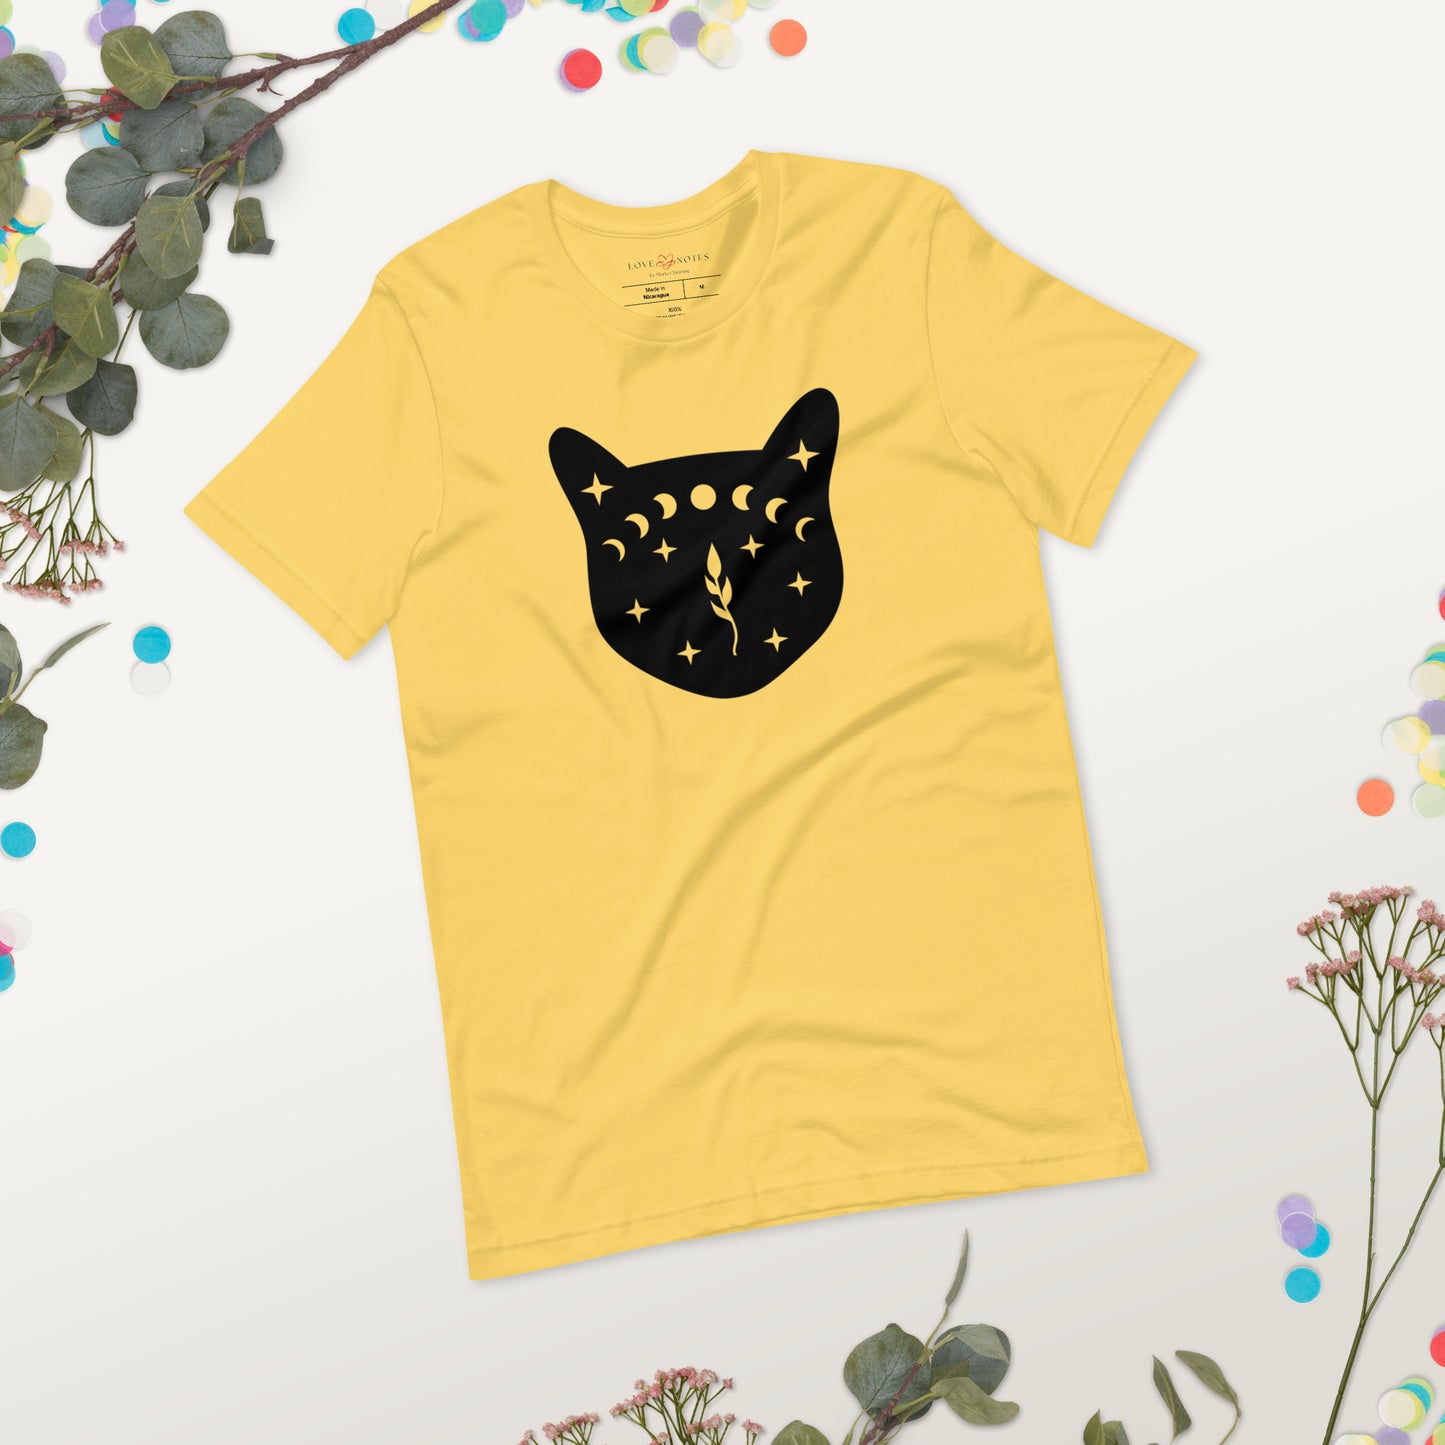 Unisex Tee: Black Cat Face with Moon Phases